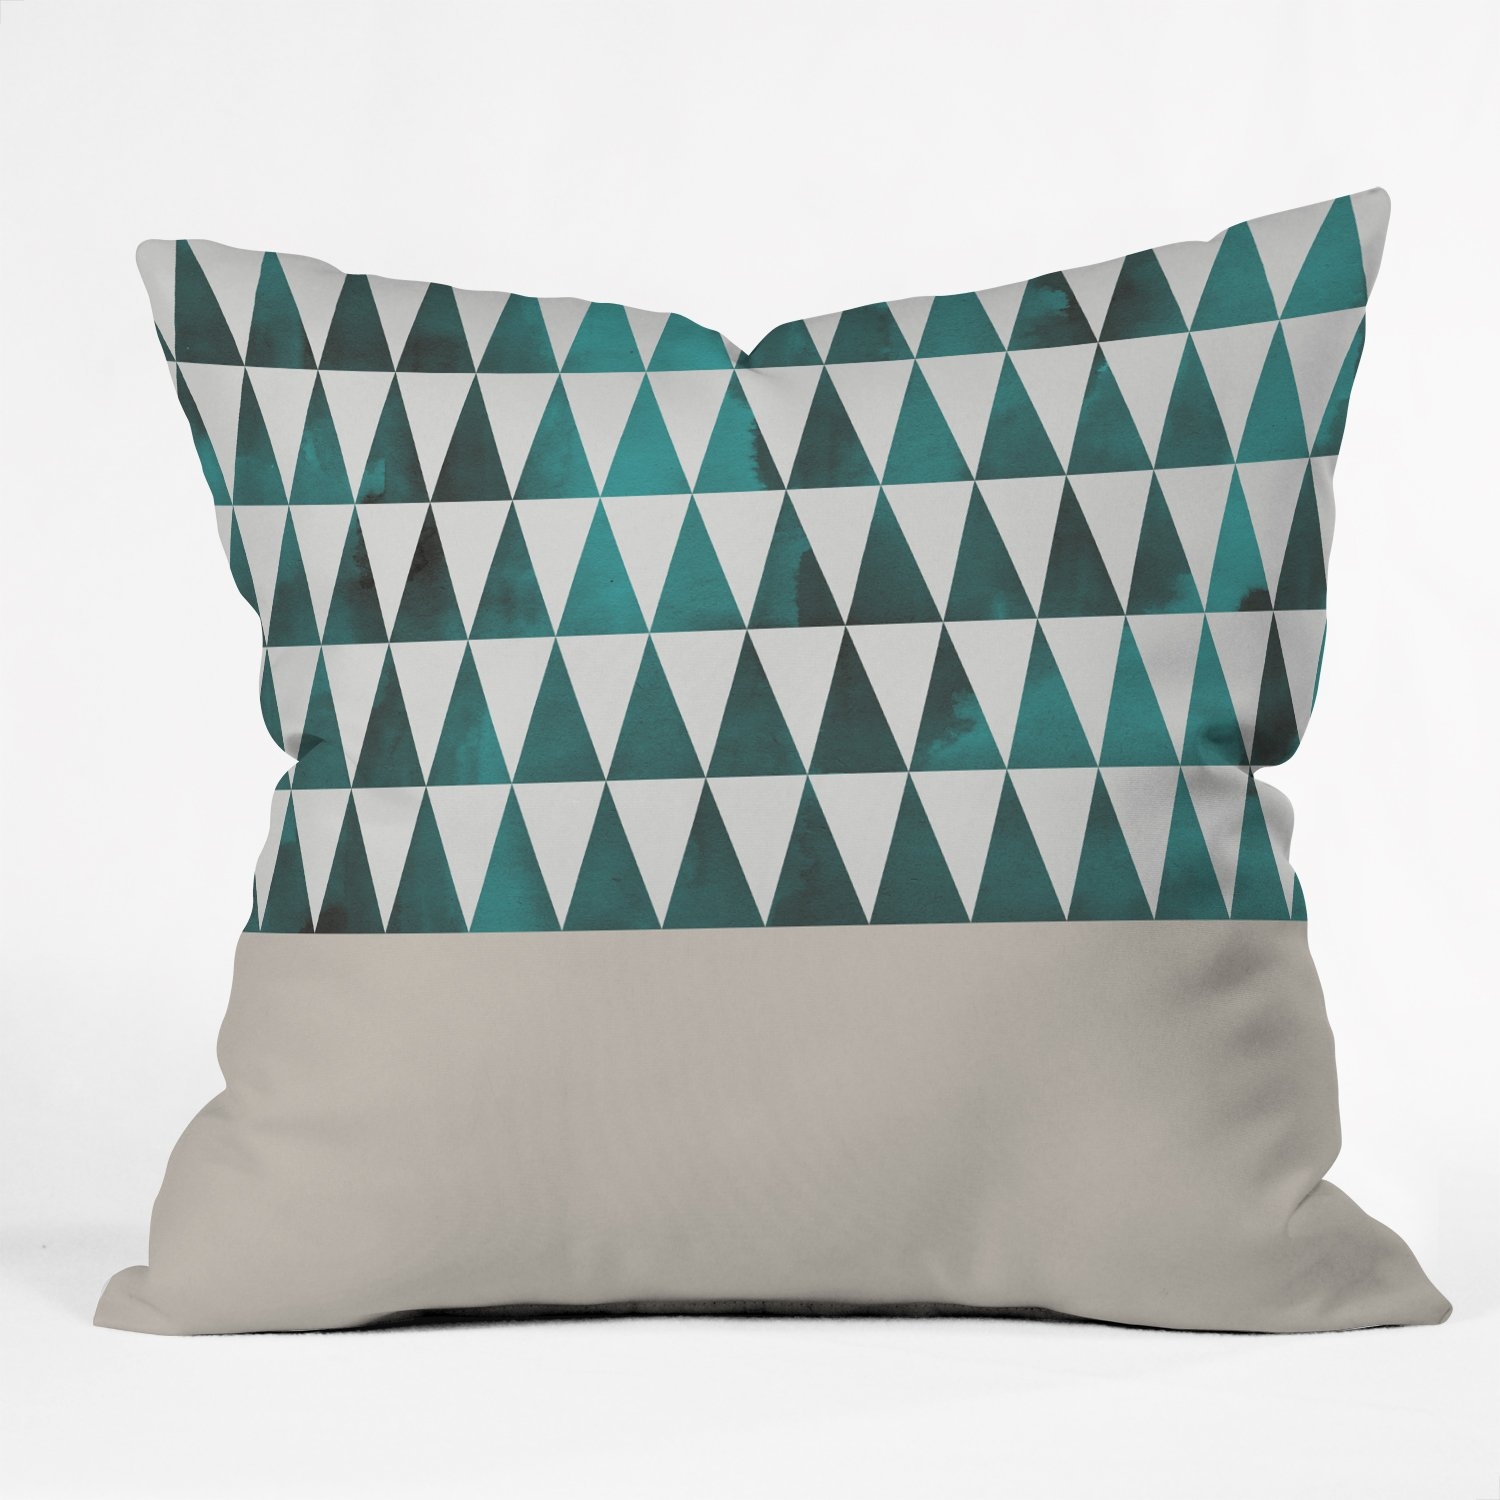 TEAL TRIANGLES  BY GEORGIANA PARASCHIV - Image 0